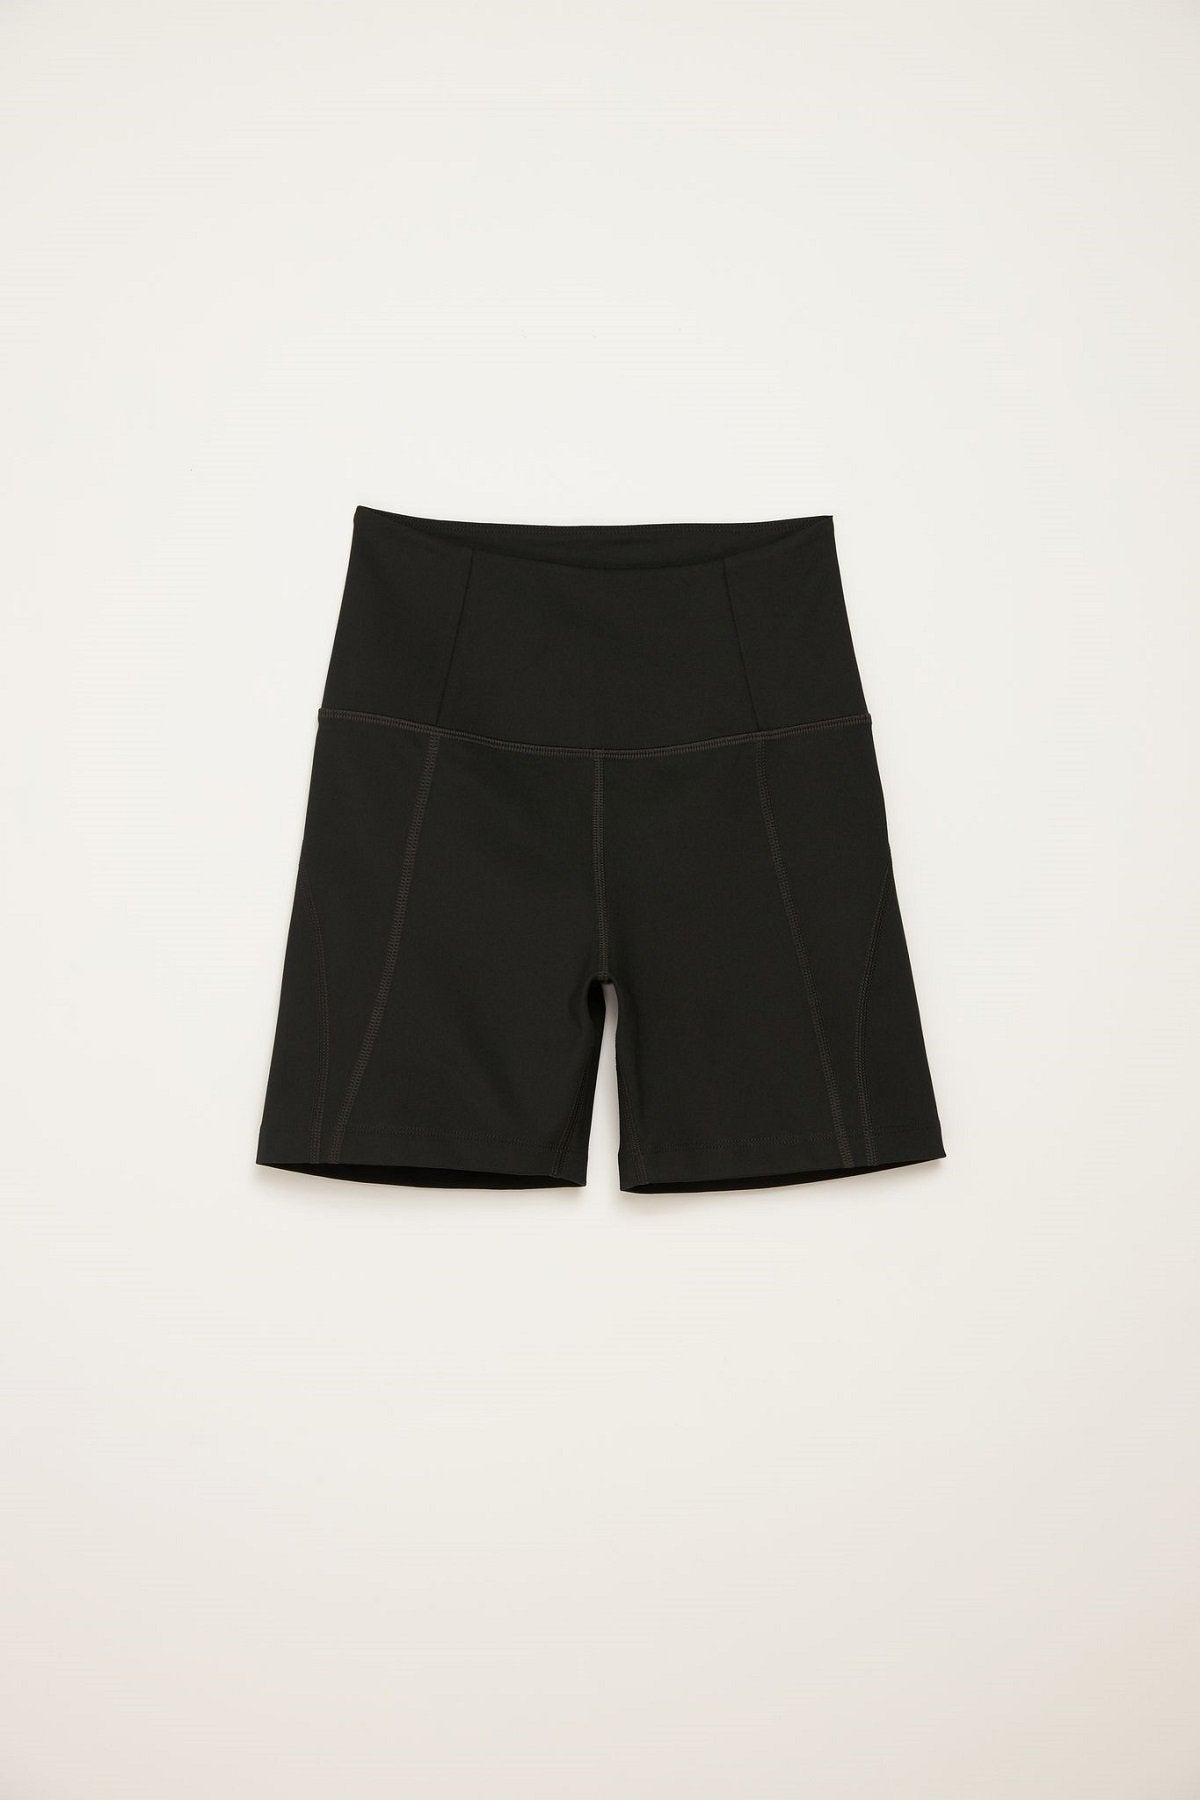 Girlfriend Collective Run Shorts High-Rise - Made from Recycled Plastic Bottles Black Pants